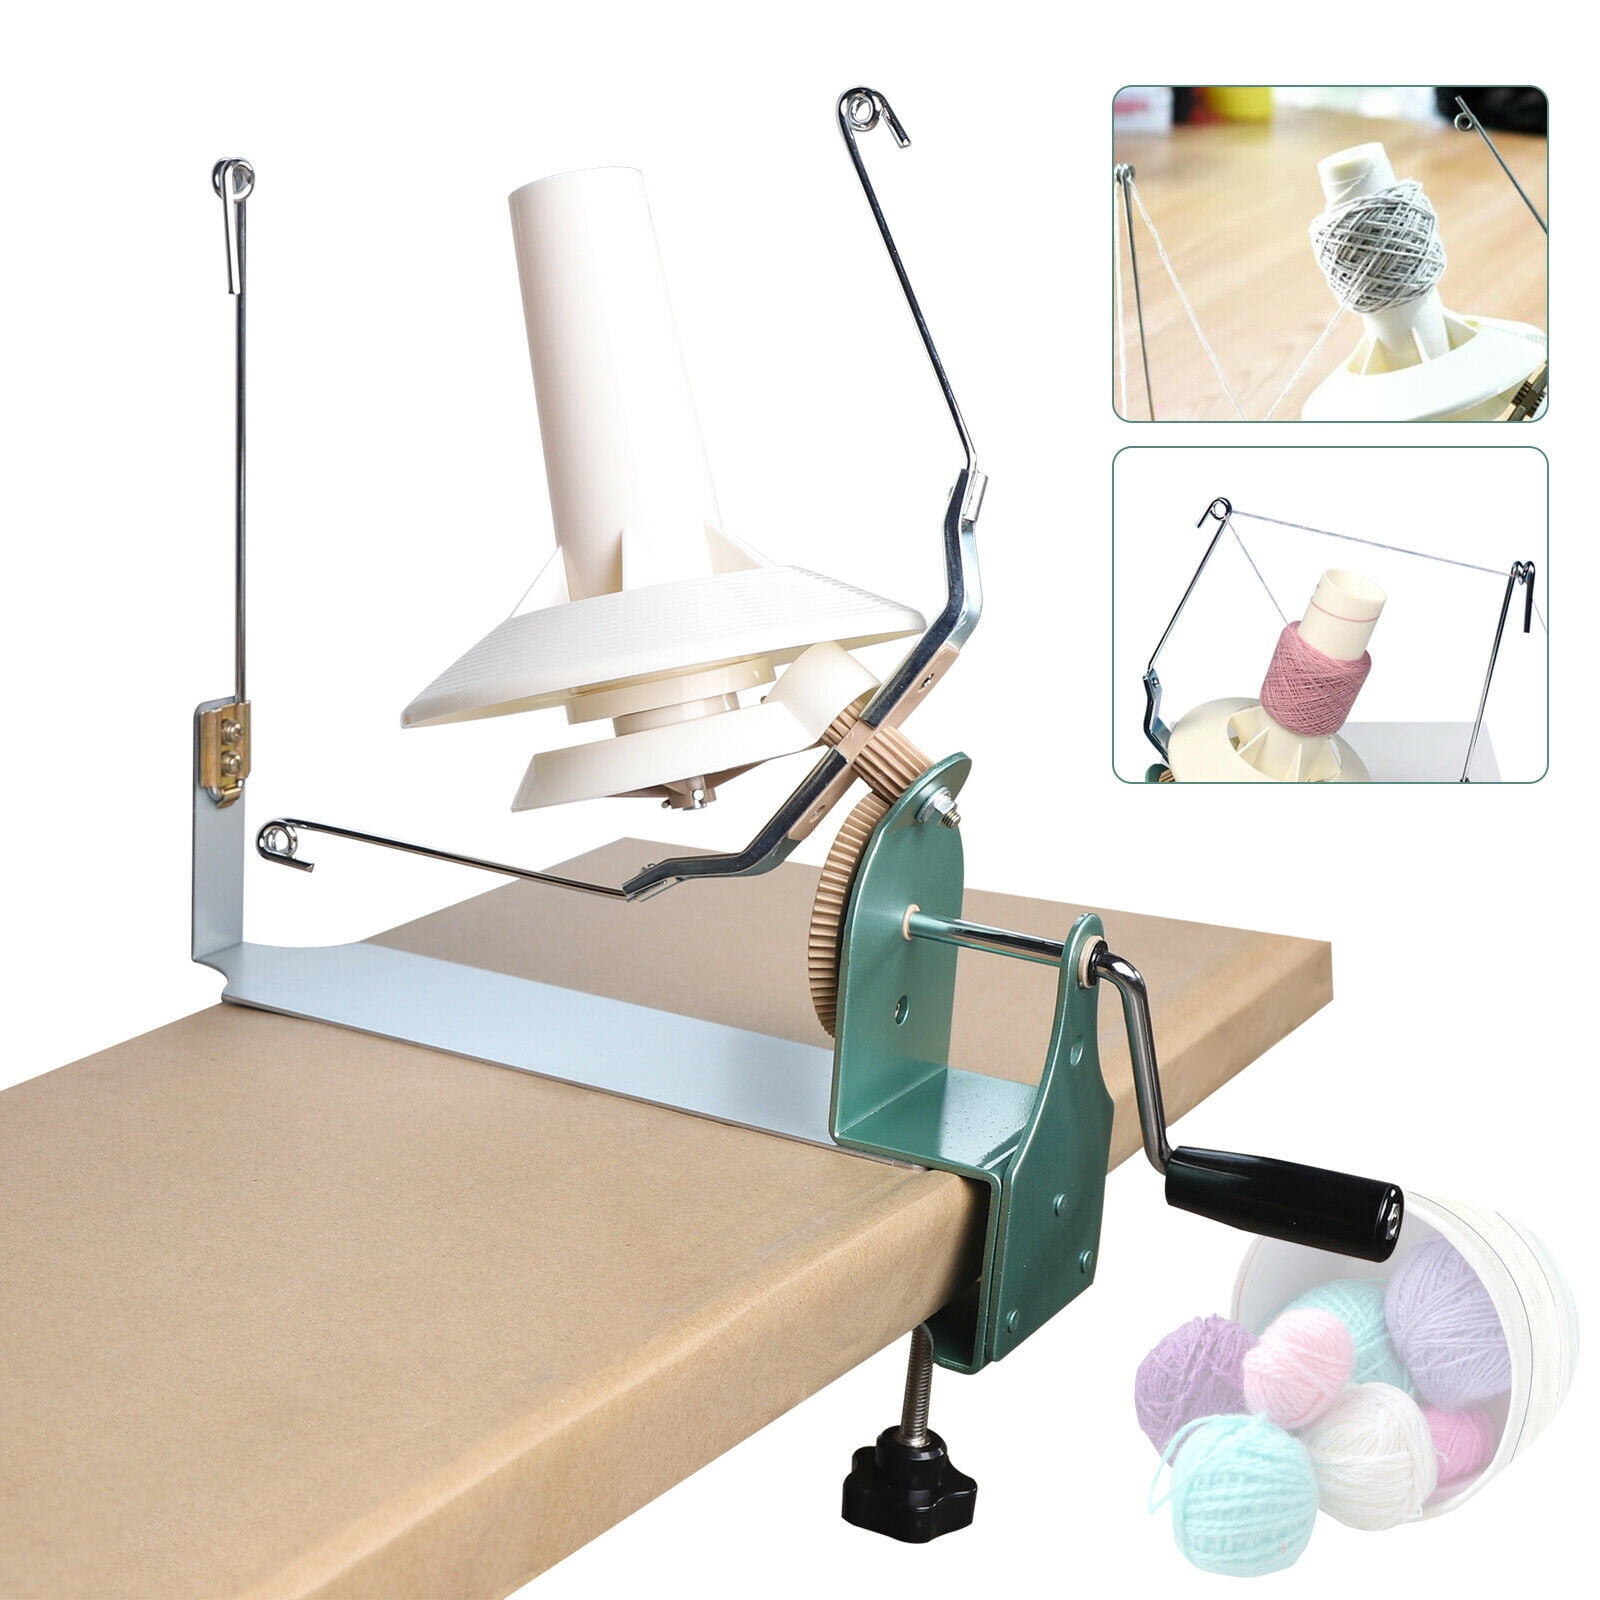 Hand Operated Premium Crafted Knitting & Crochet Ball Winder, Knitter's  Gifts Center Pull Ball Winder